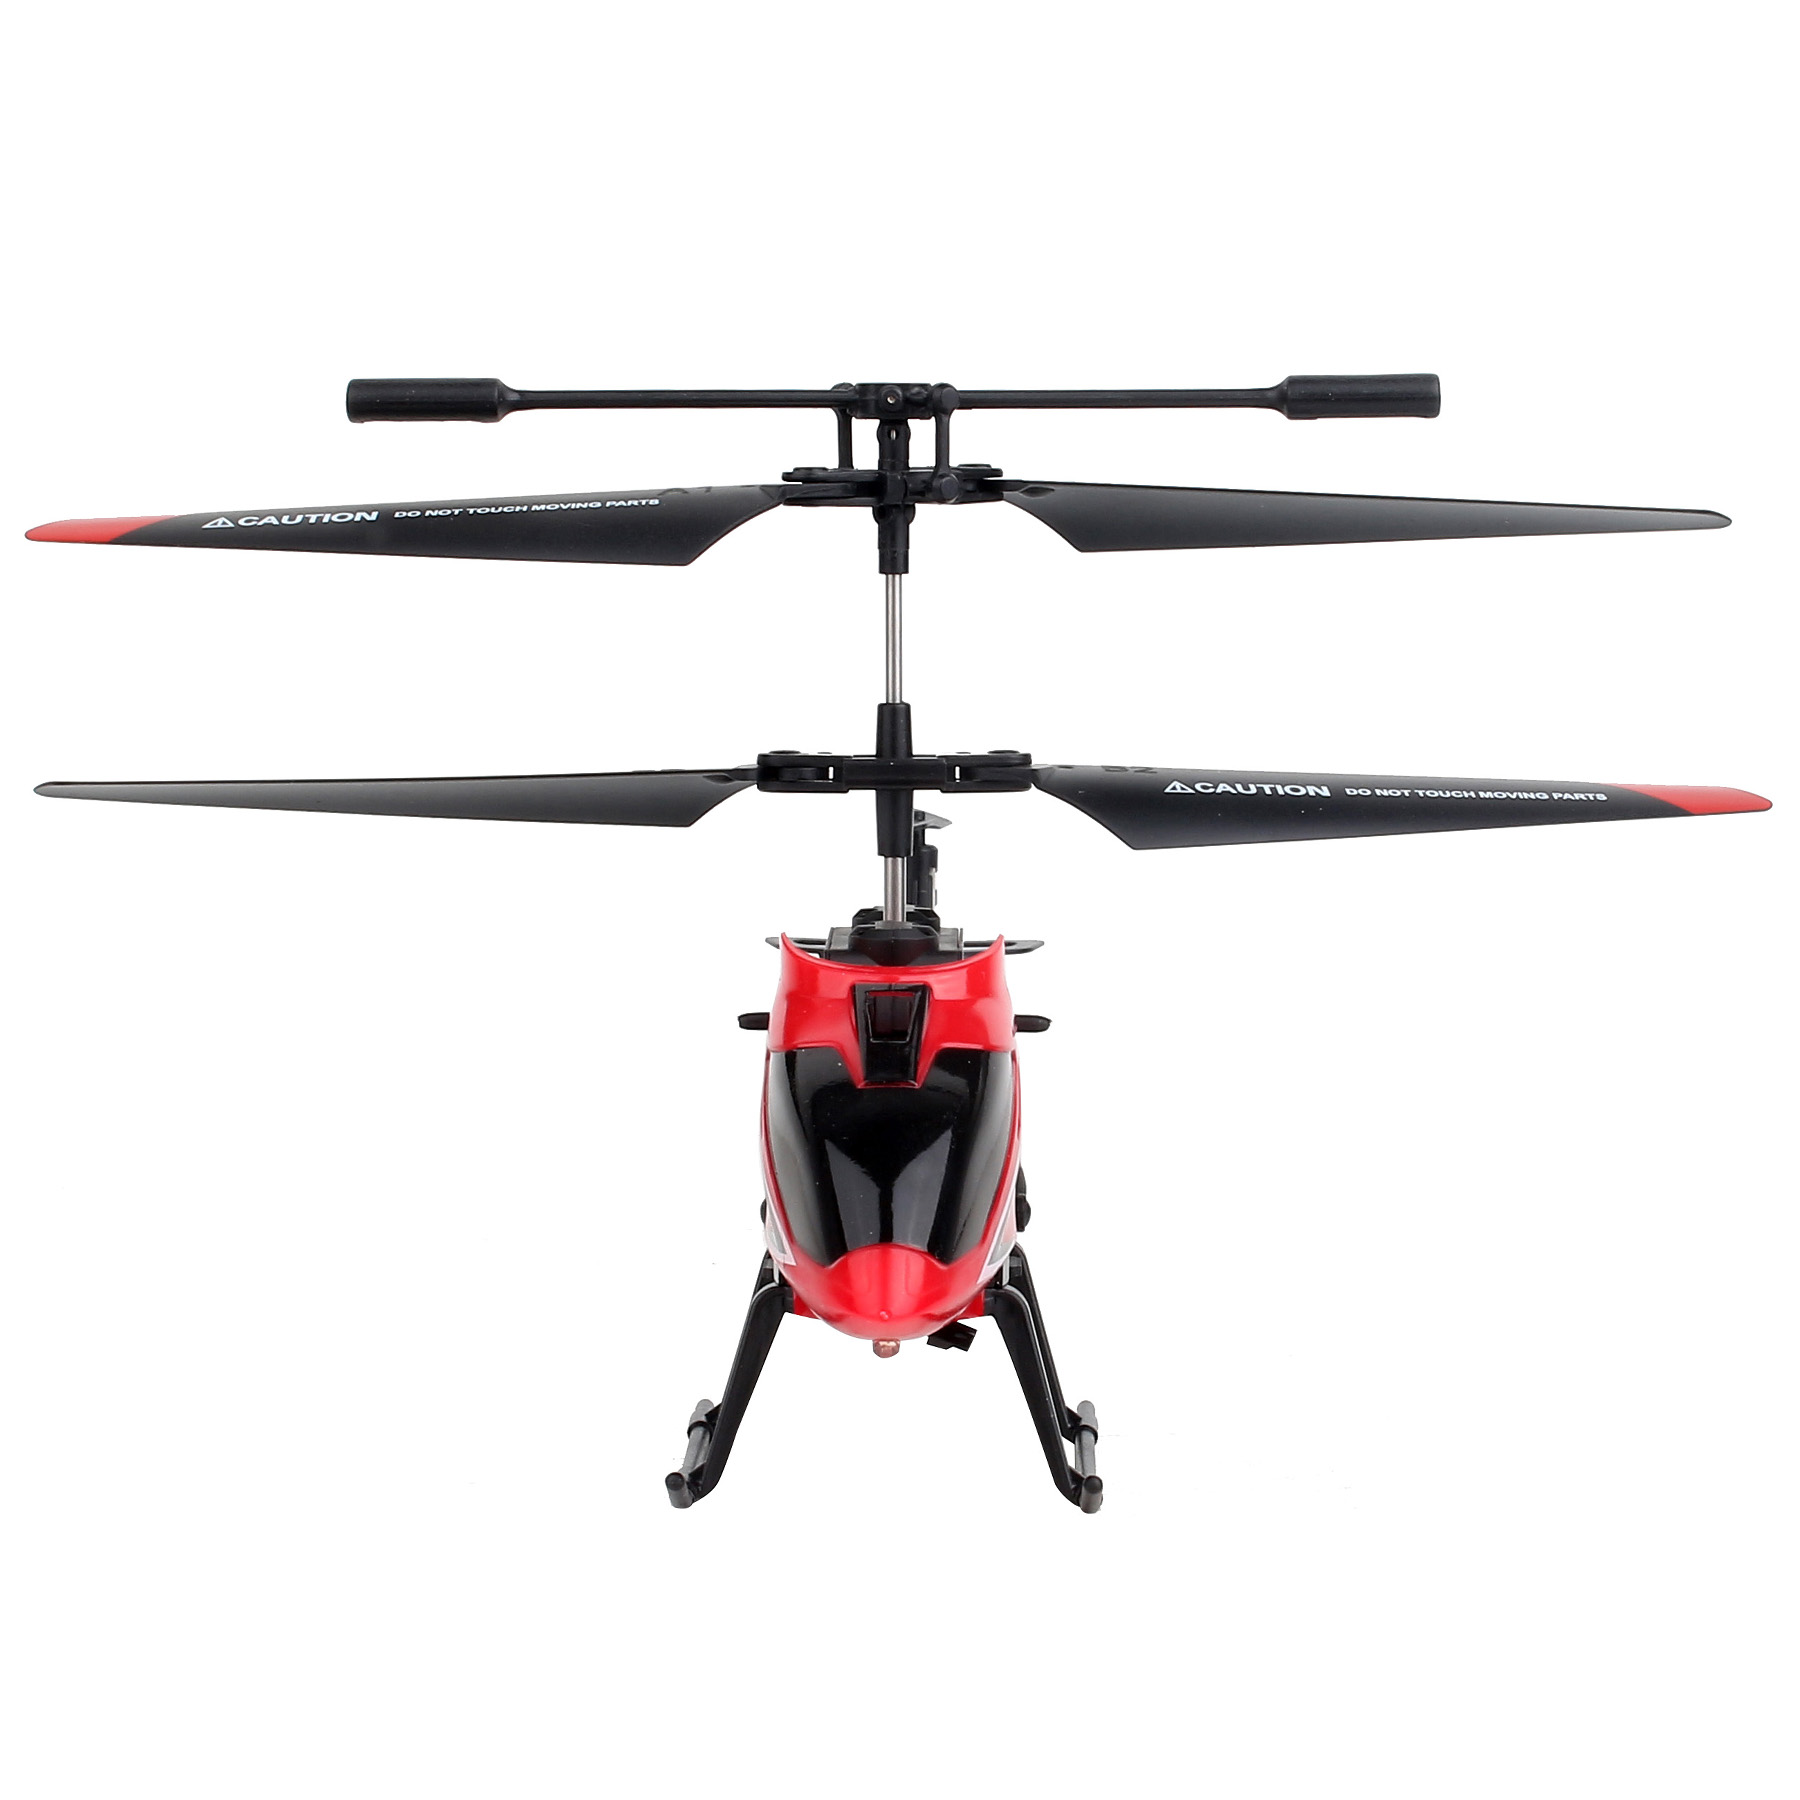 Swift Stream RC  Remote Control Helicopter, Red - image 3 of 5